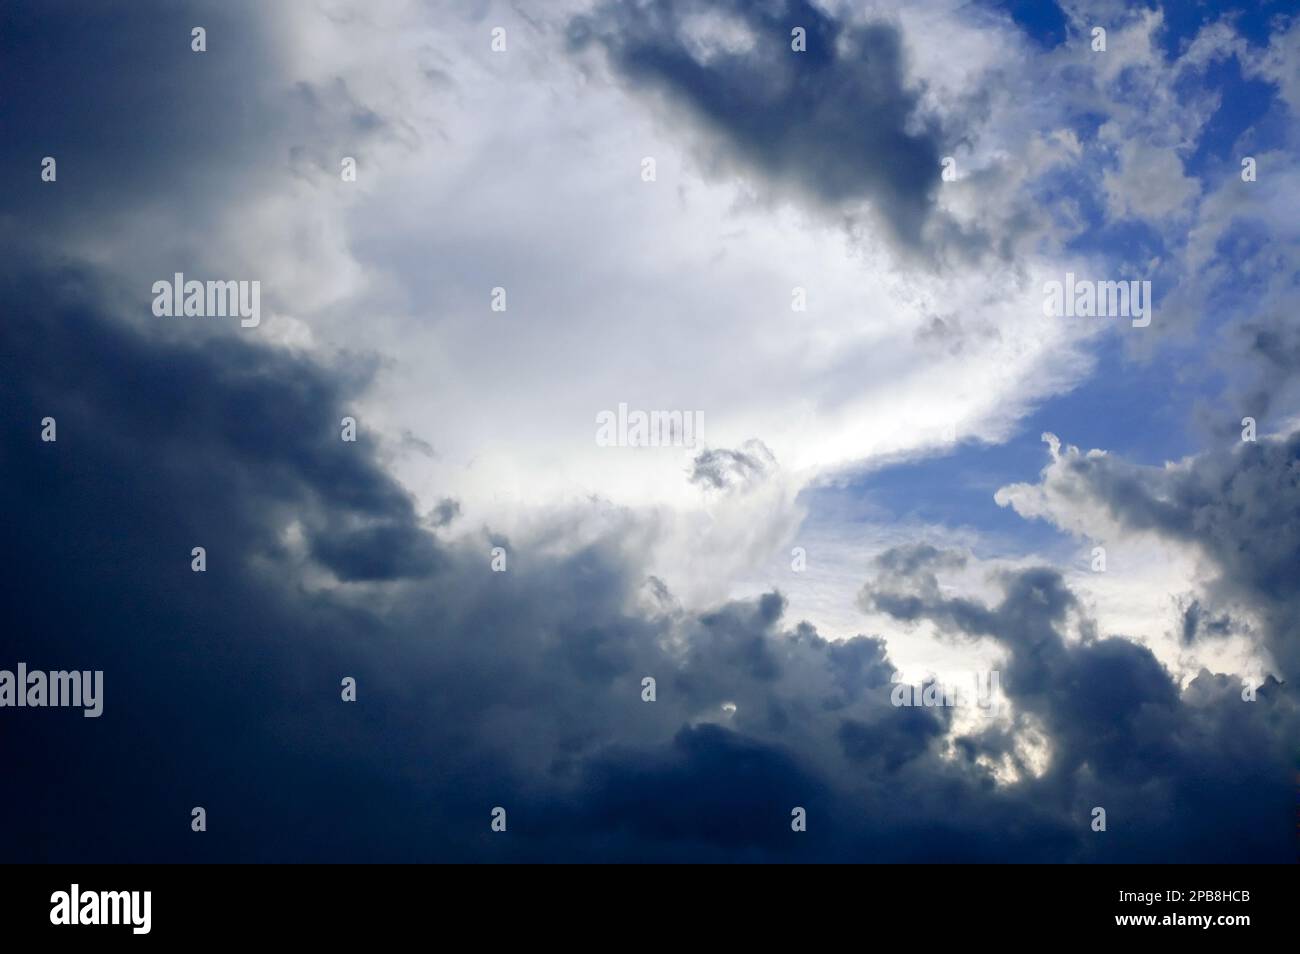 A dramatic sky, suggesting Heaven or sun coming out after a storm Stock Photo